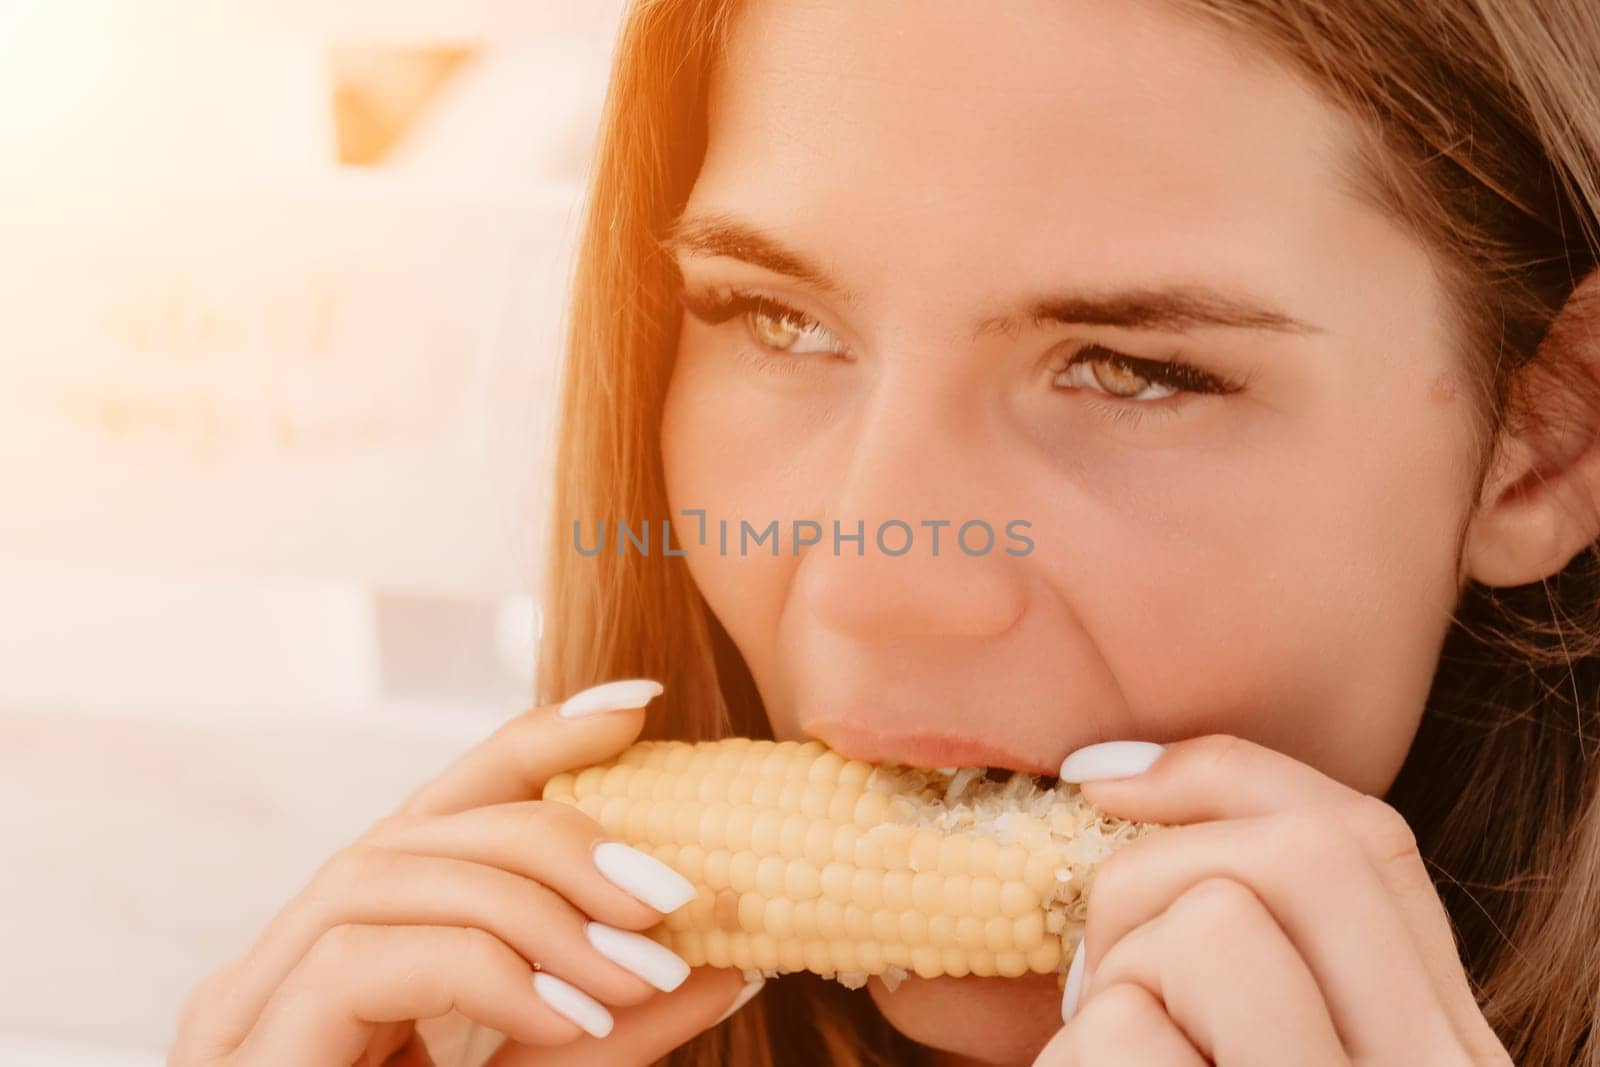 Healthy vegetarian hipster woman in summer outfit eat grilled corn and look to camera. Sexy lady on sea beach sunset or ocean sunrise. Travel, explore, active yoga and meditation lifestyle concept.